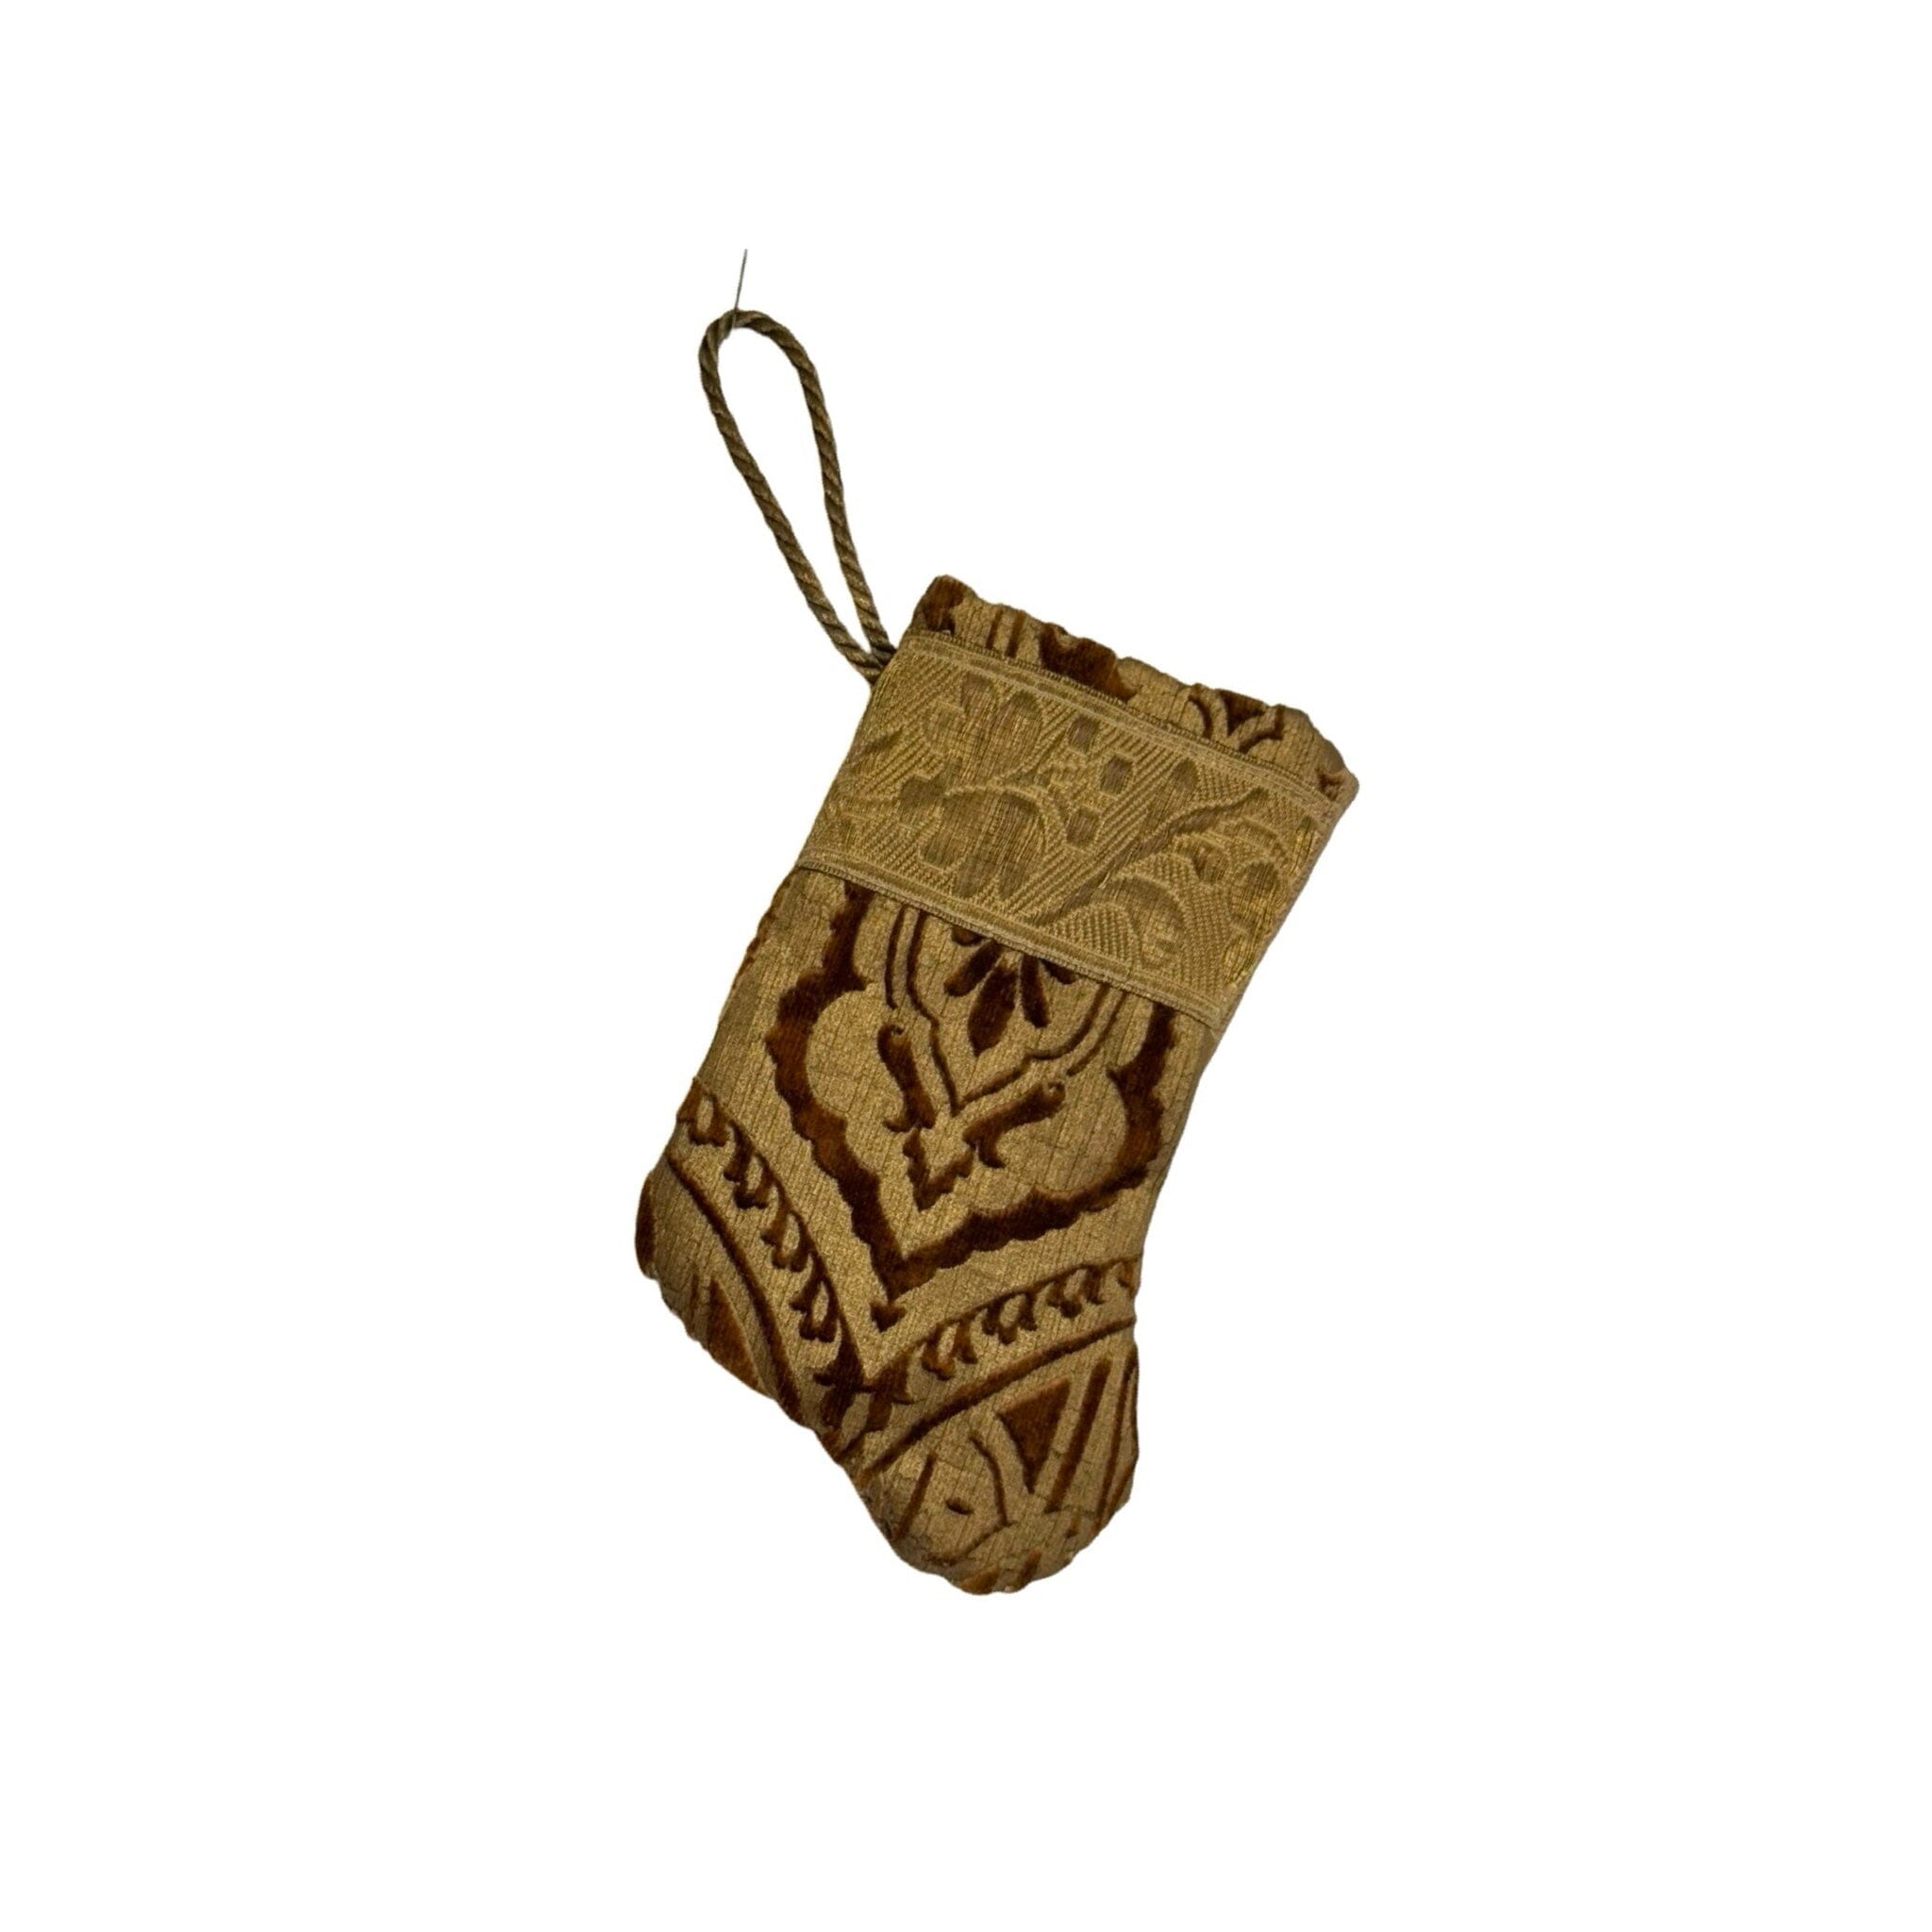 Handmade Mini Stocking Made From Vintage Fabric and Trims- Brown and Gold Ornament B. Viz Design D 